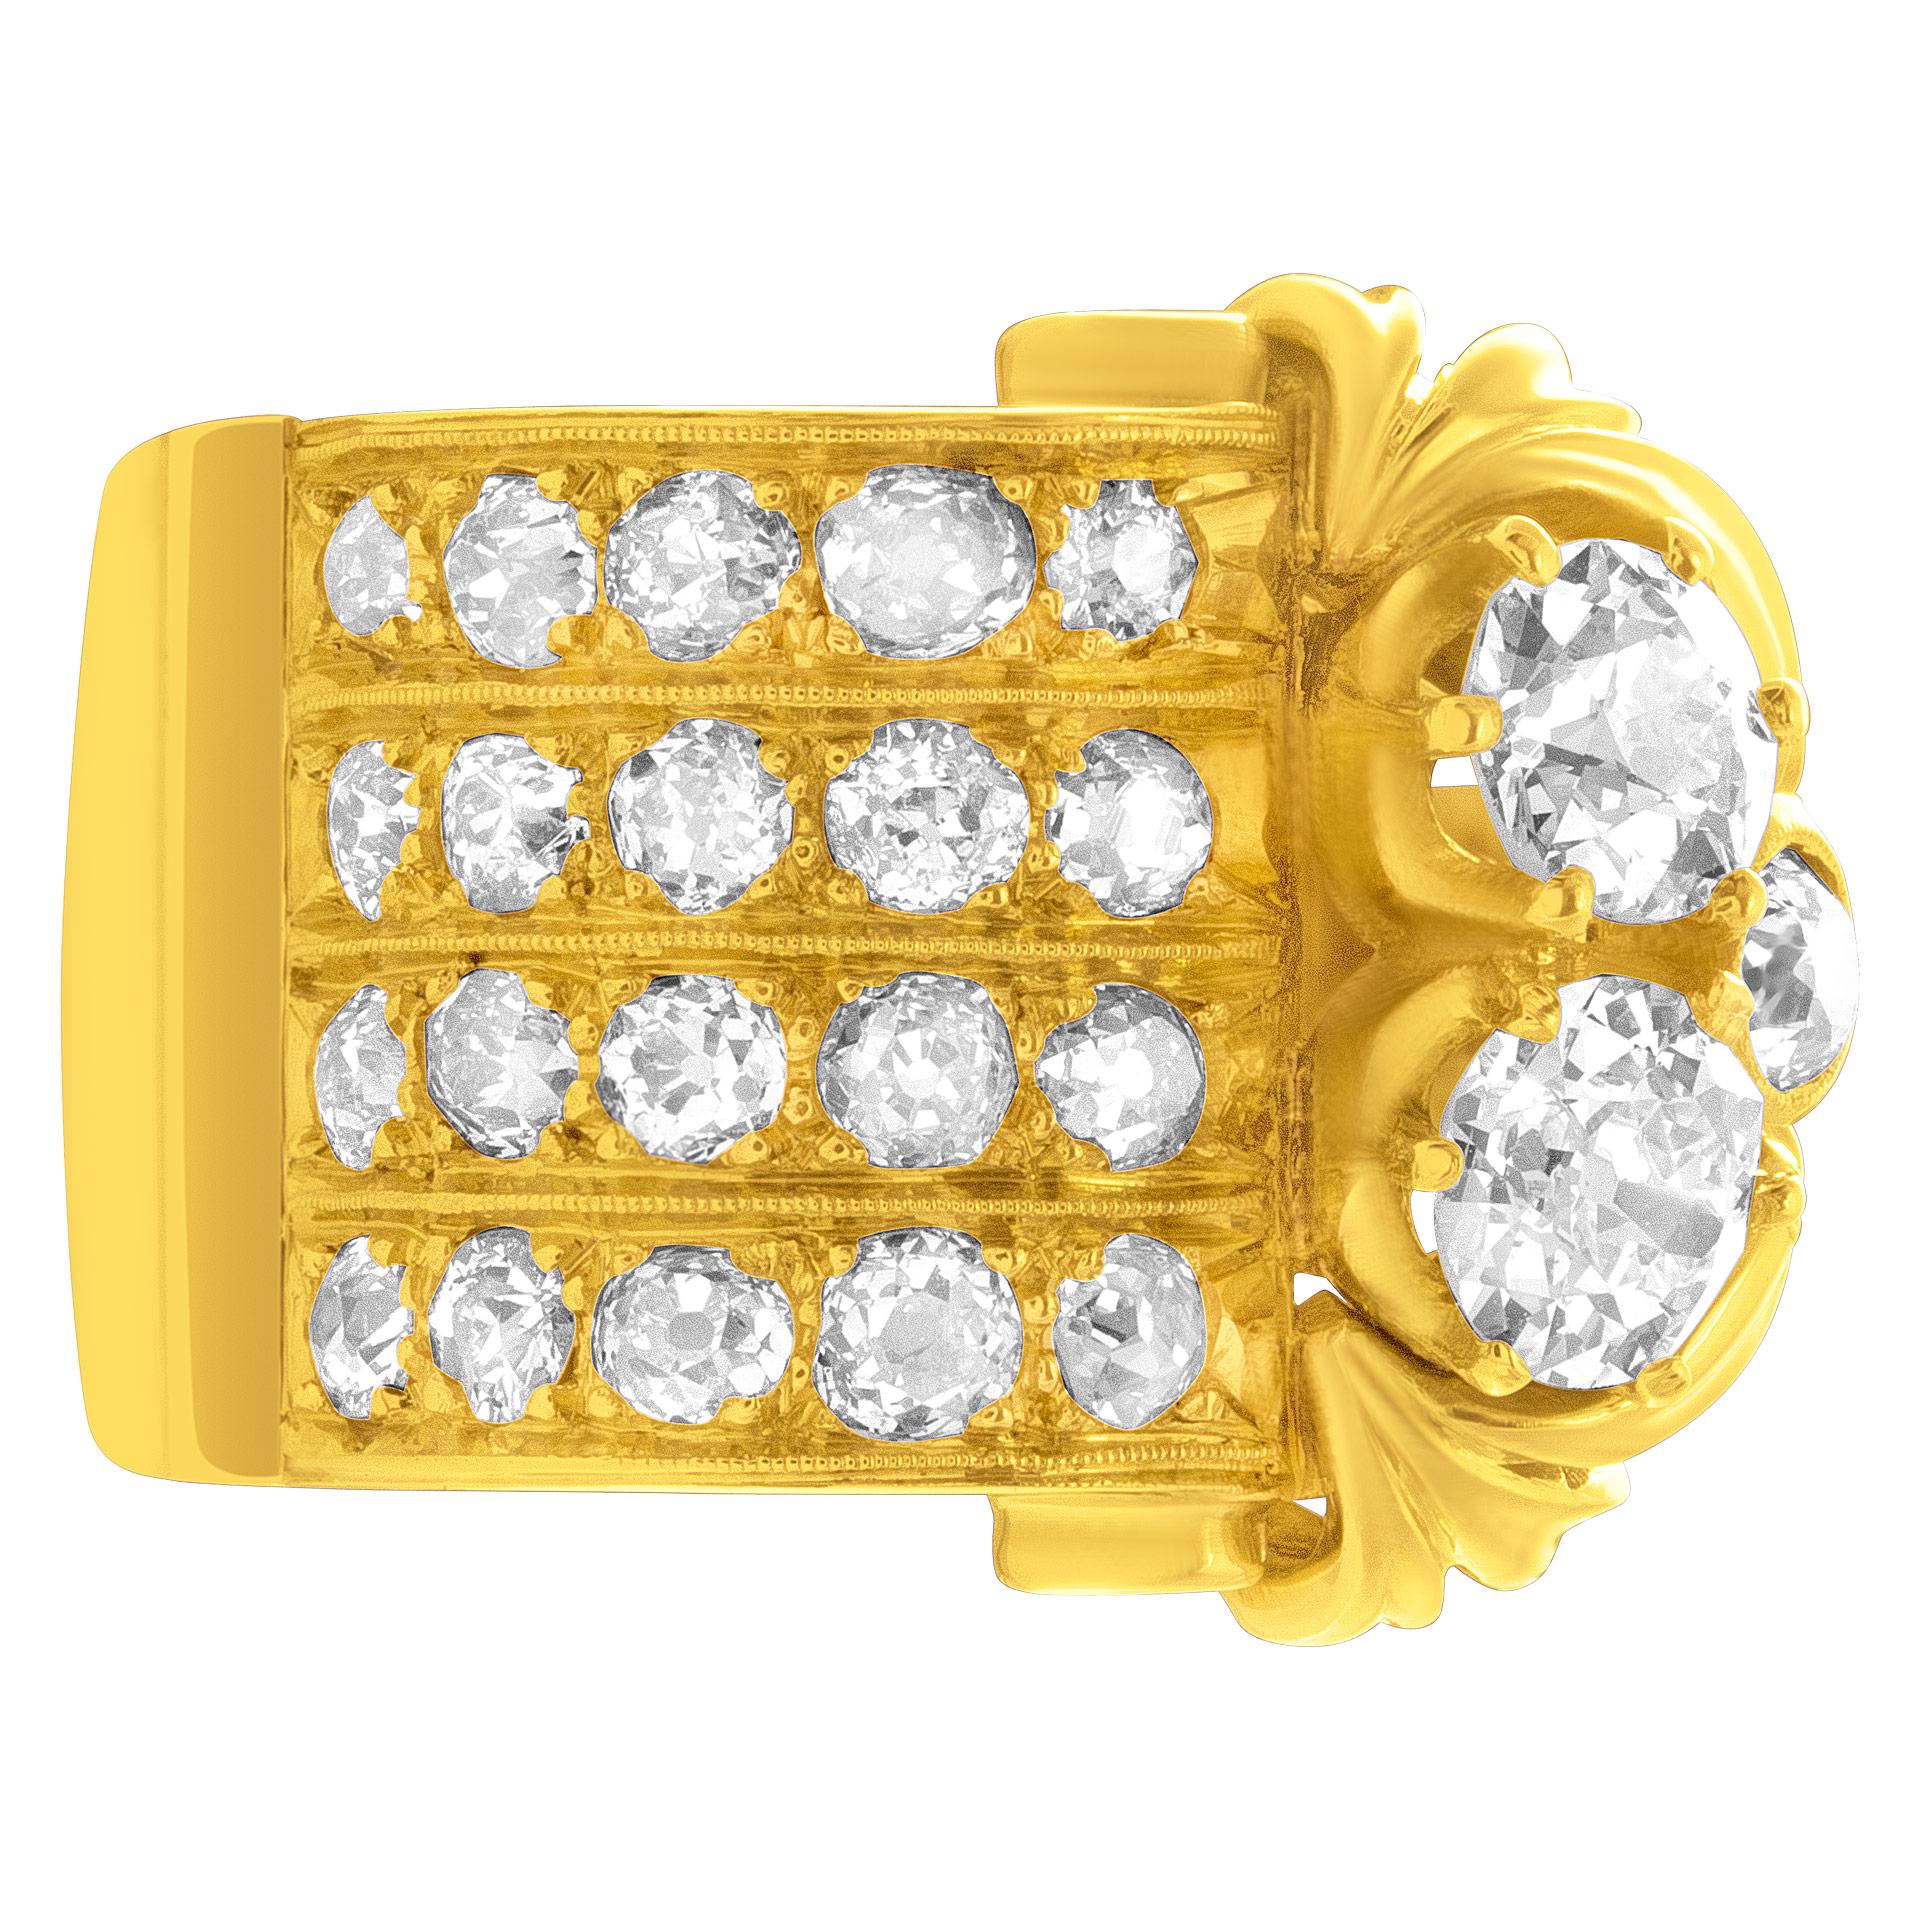 ESTIMATED RETAIL: $9,000 YOUR PRICE: $5,880 - Old European cut diamond ring with approximately 2 carats in diamonds set in 18k yellow gold. Size 7. Width at head: 18mm, width at shank: 4.5mm.
